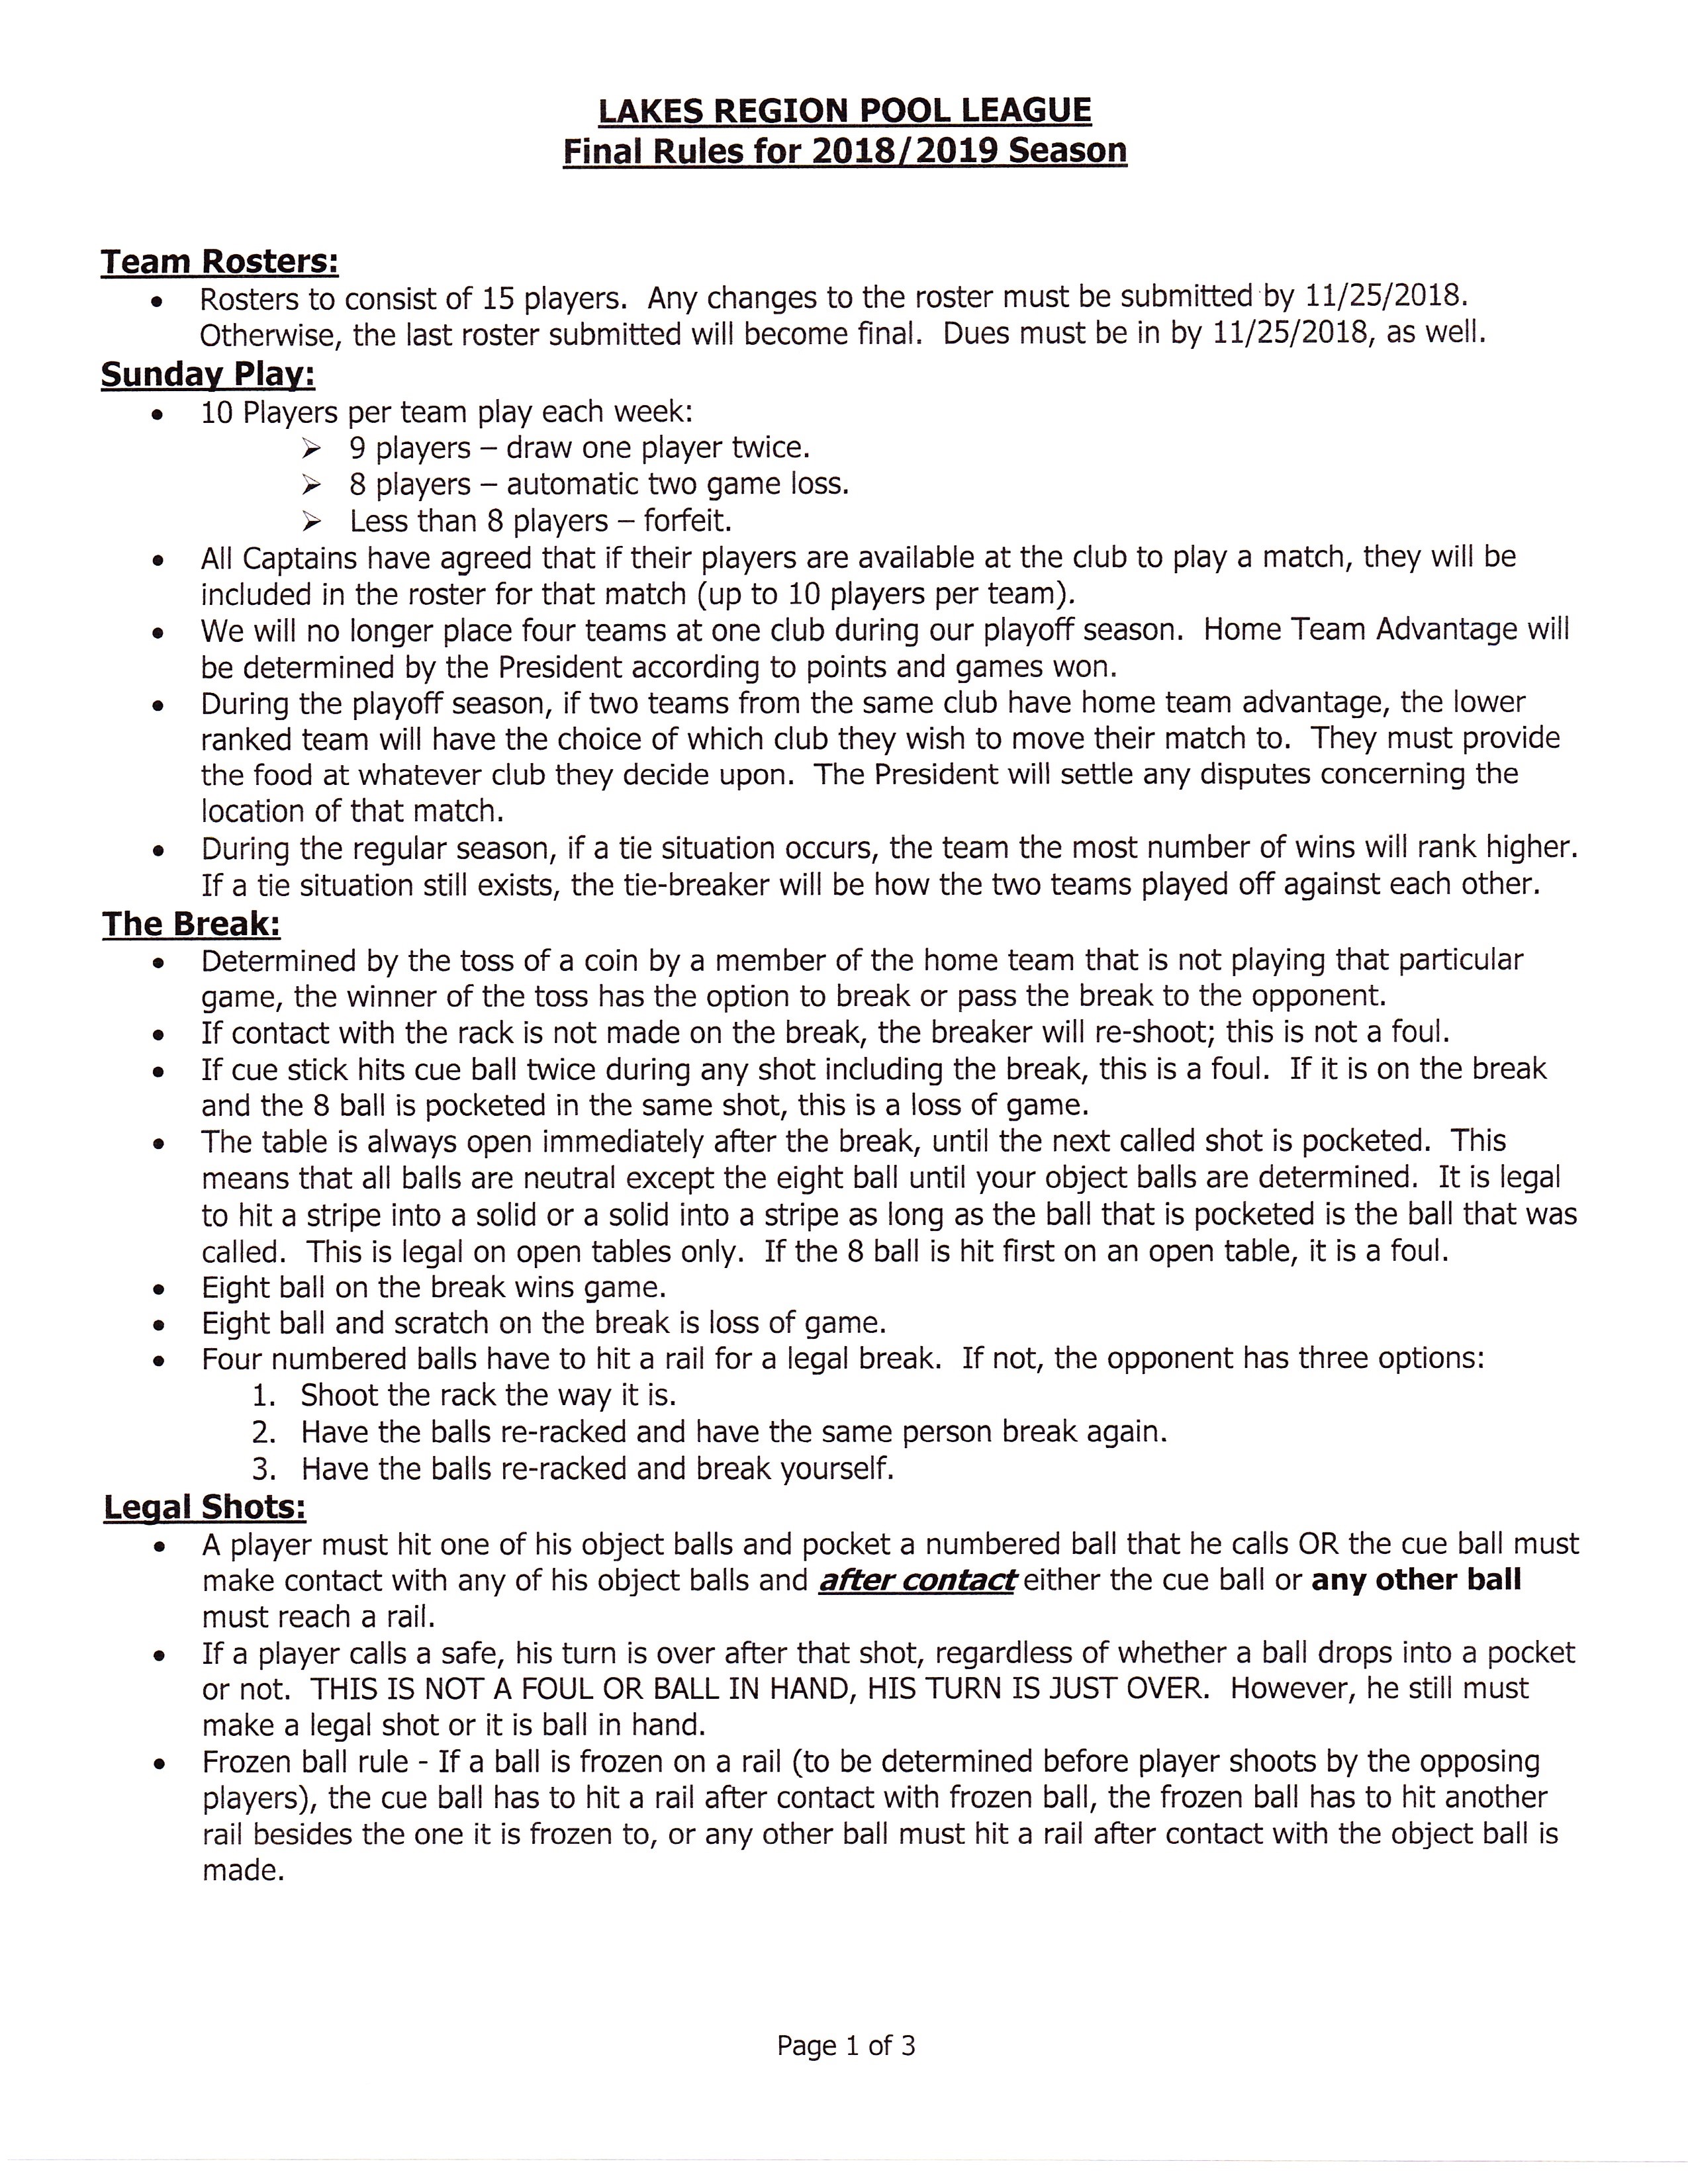 Rules2018-2019-Page1.jpg